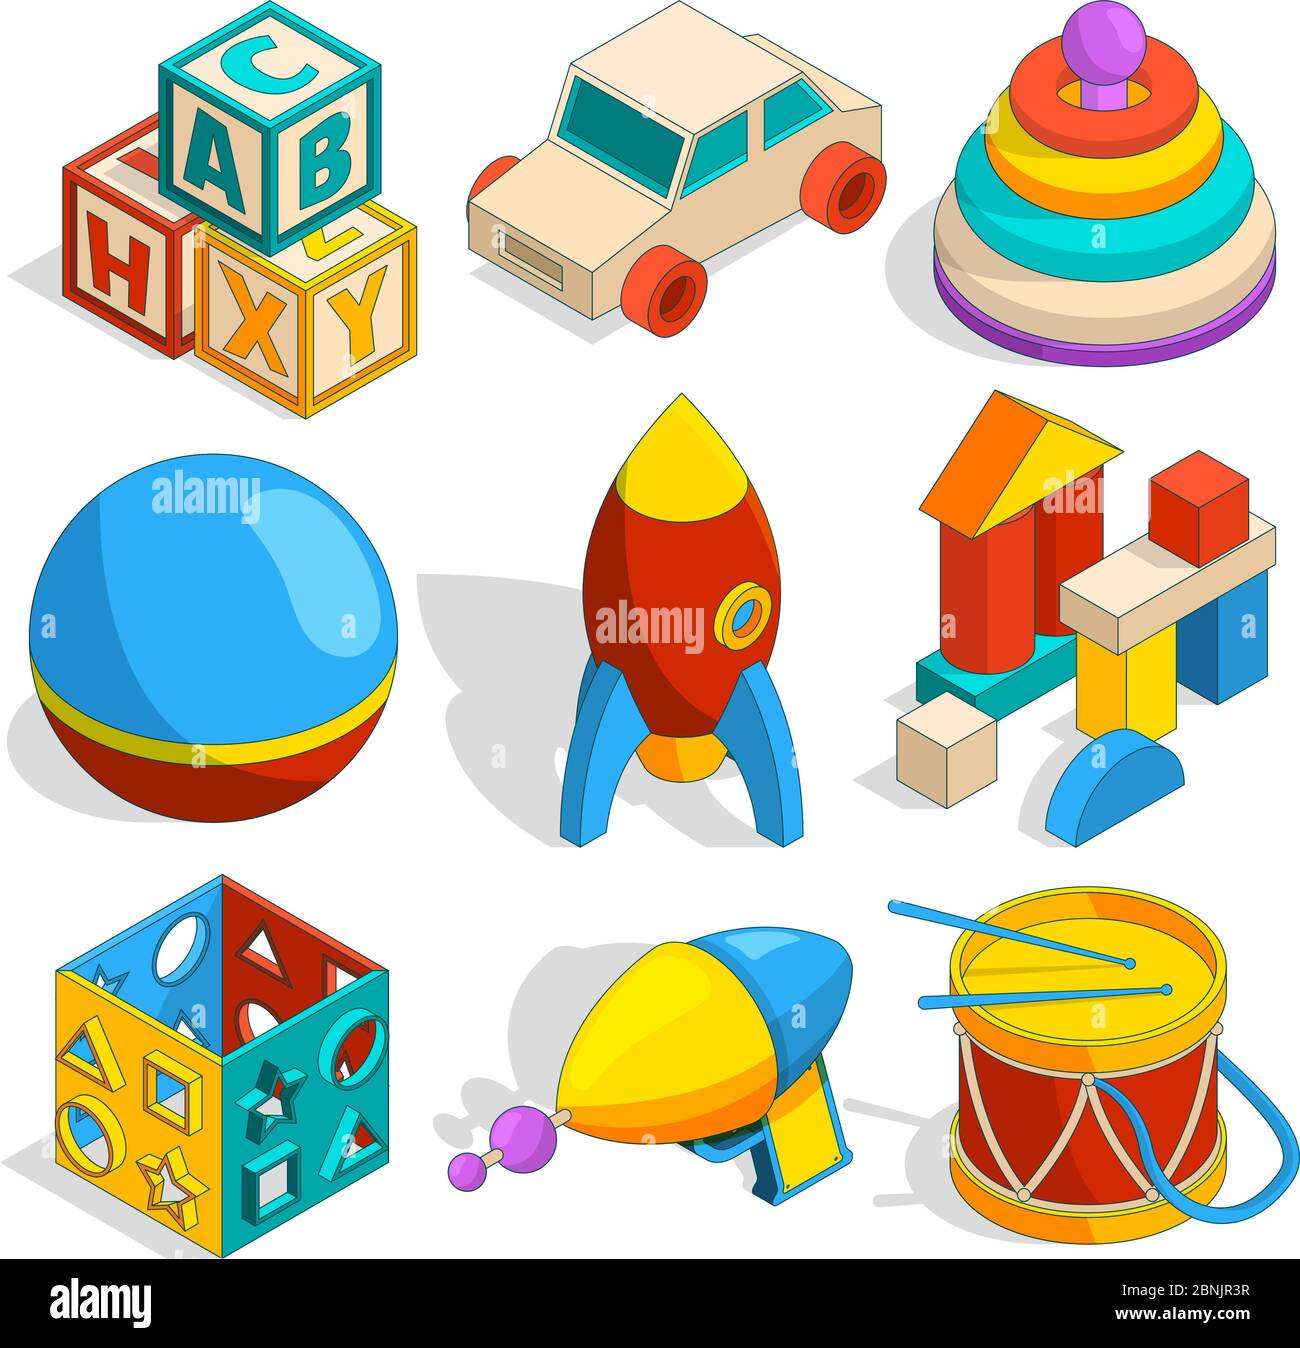 Isometric illustrations of various childrens toys Stock Vector